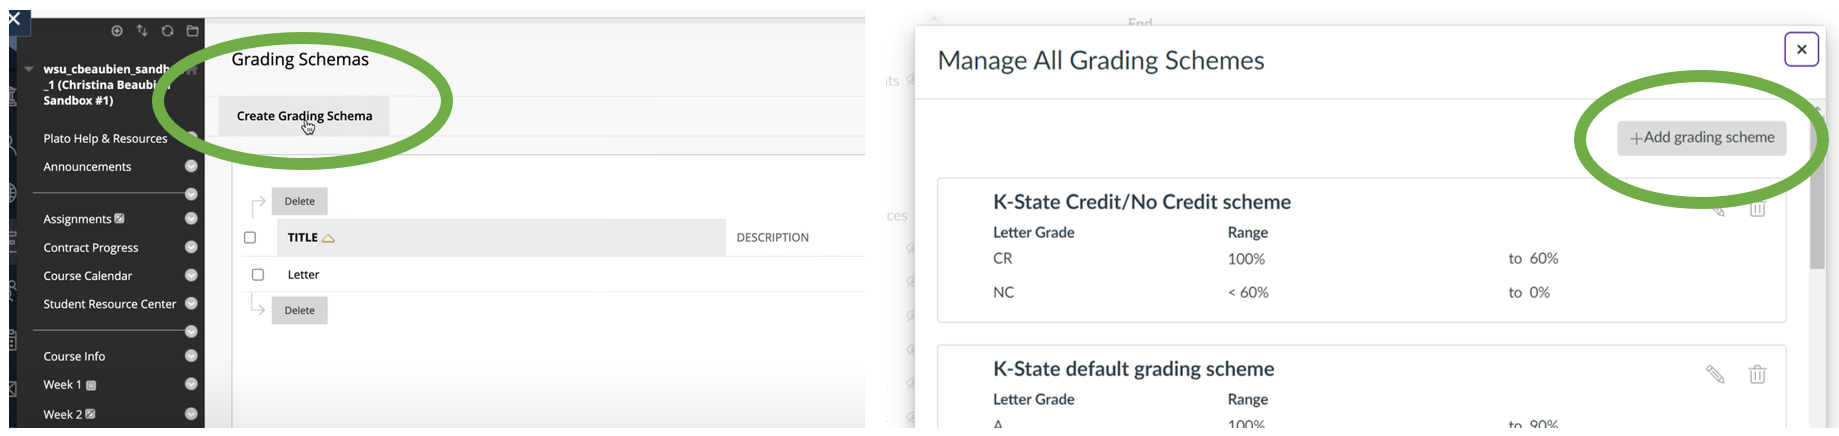 Picture 2 - Creating new grading schemes in Blackboard (left) and Canvas (right) - for Blackboard under Grading Schemas choose "create grading schema"; for Canvas, under "manage all grading schemes" choose "add grading scheme"